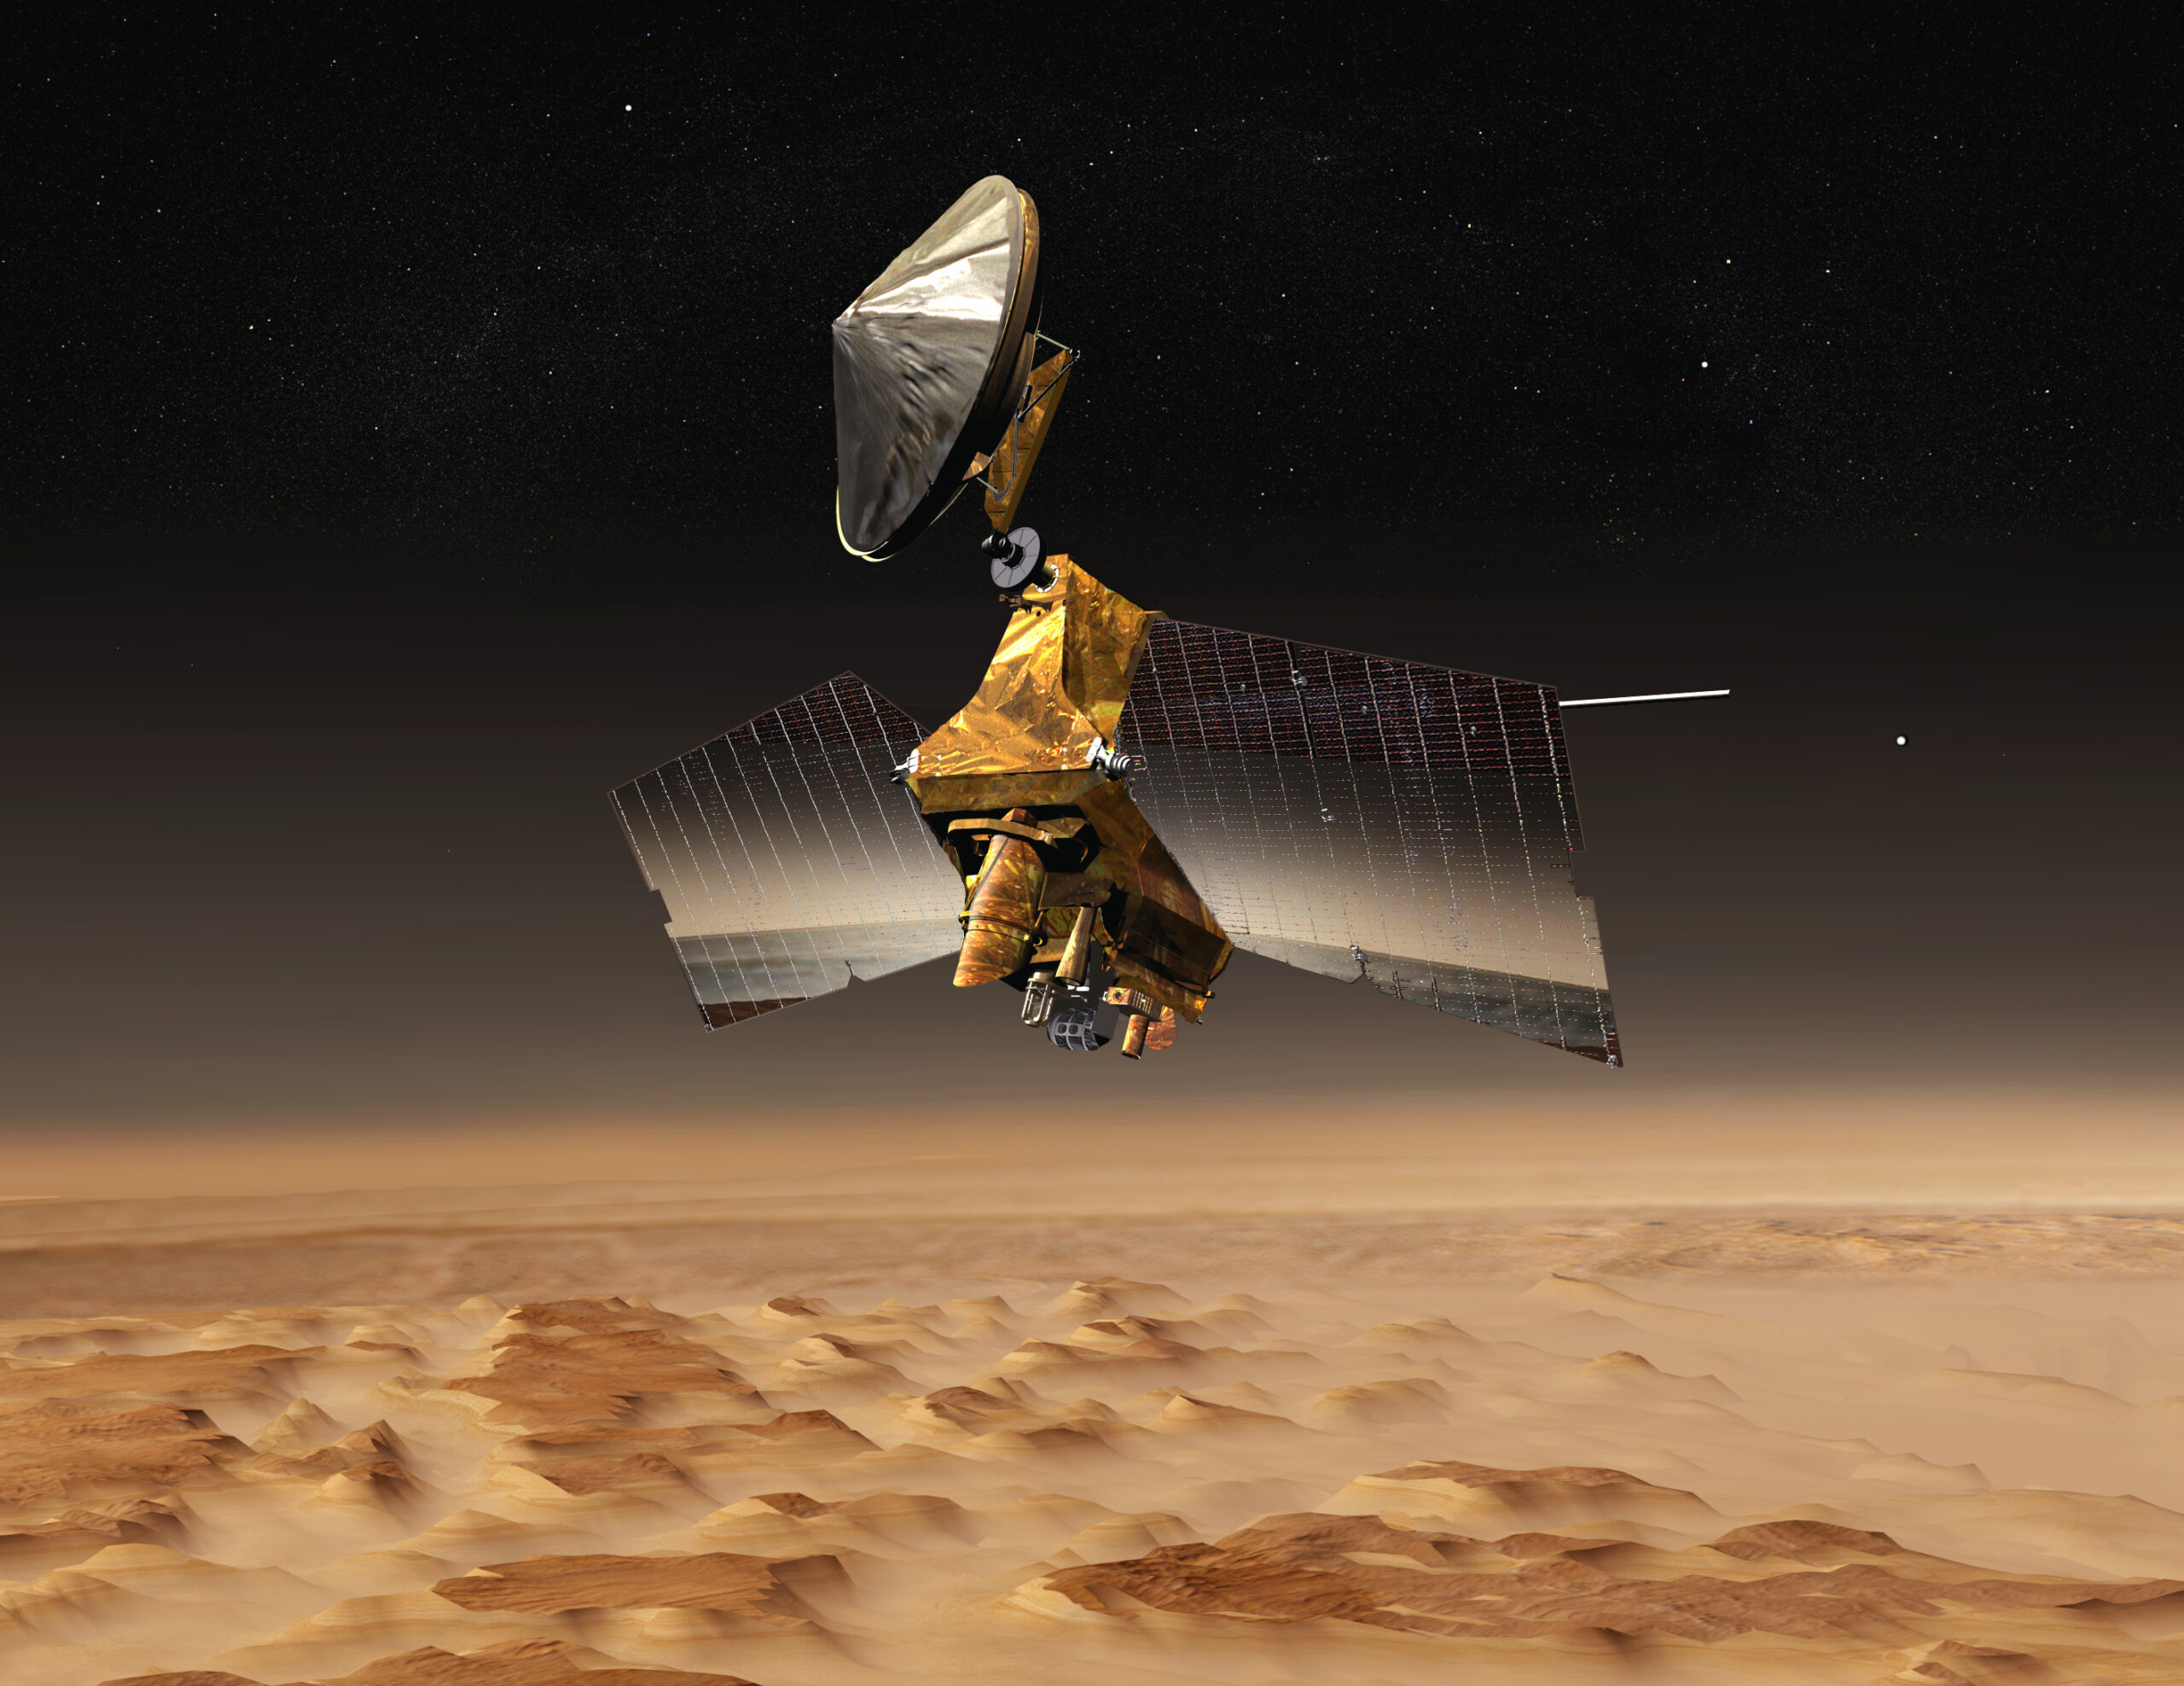 The Mars Reconnaissance Orbiter Has Been Exploring Mars For 10 Years